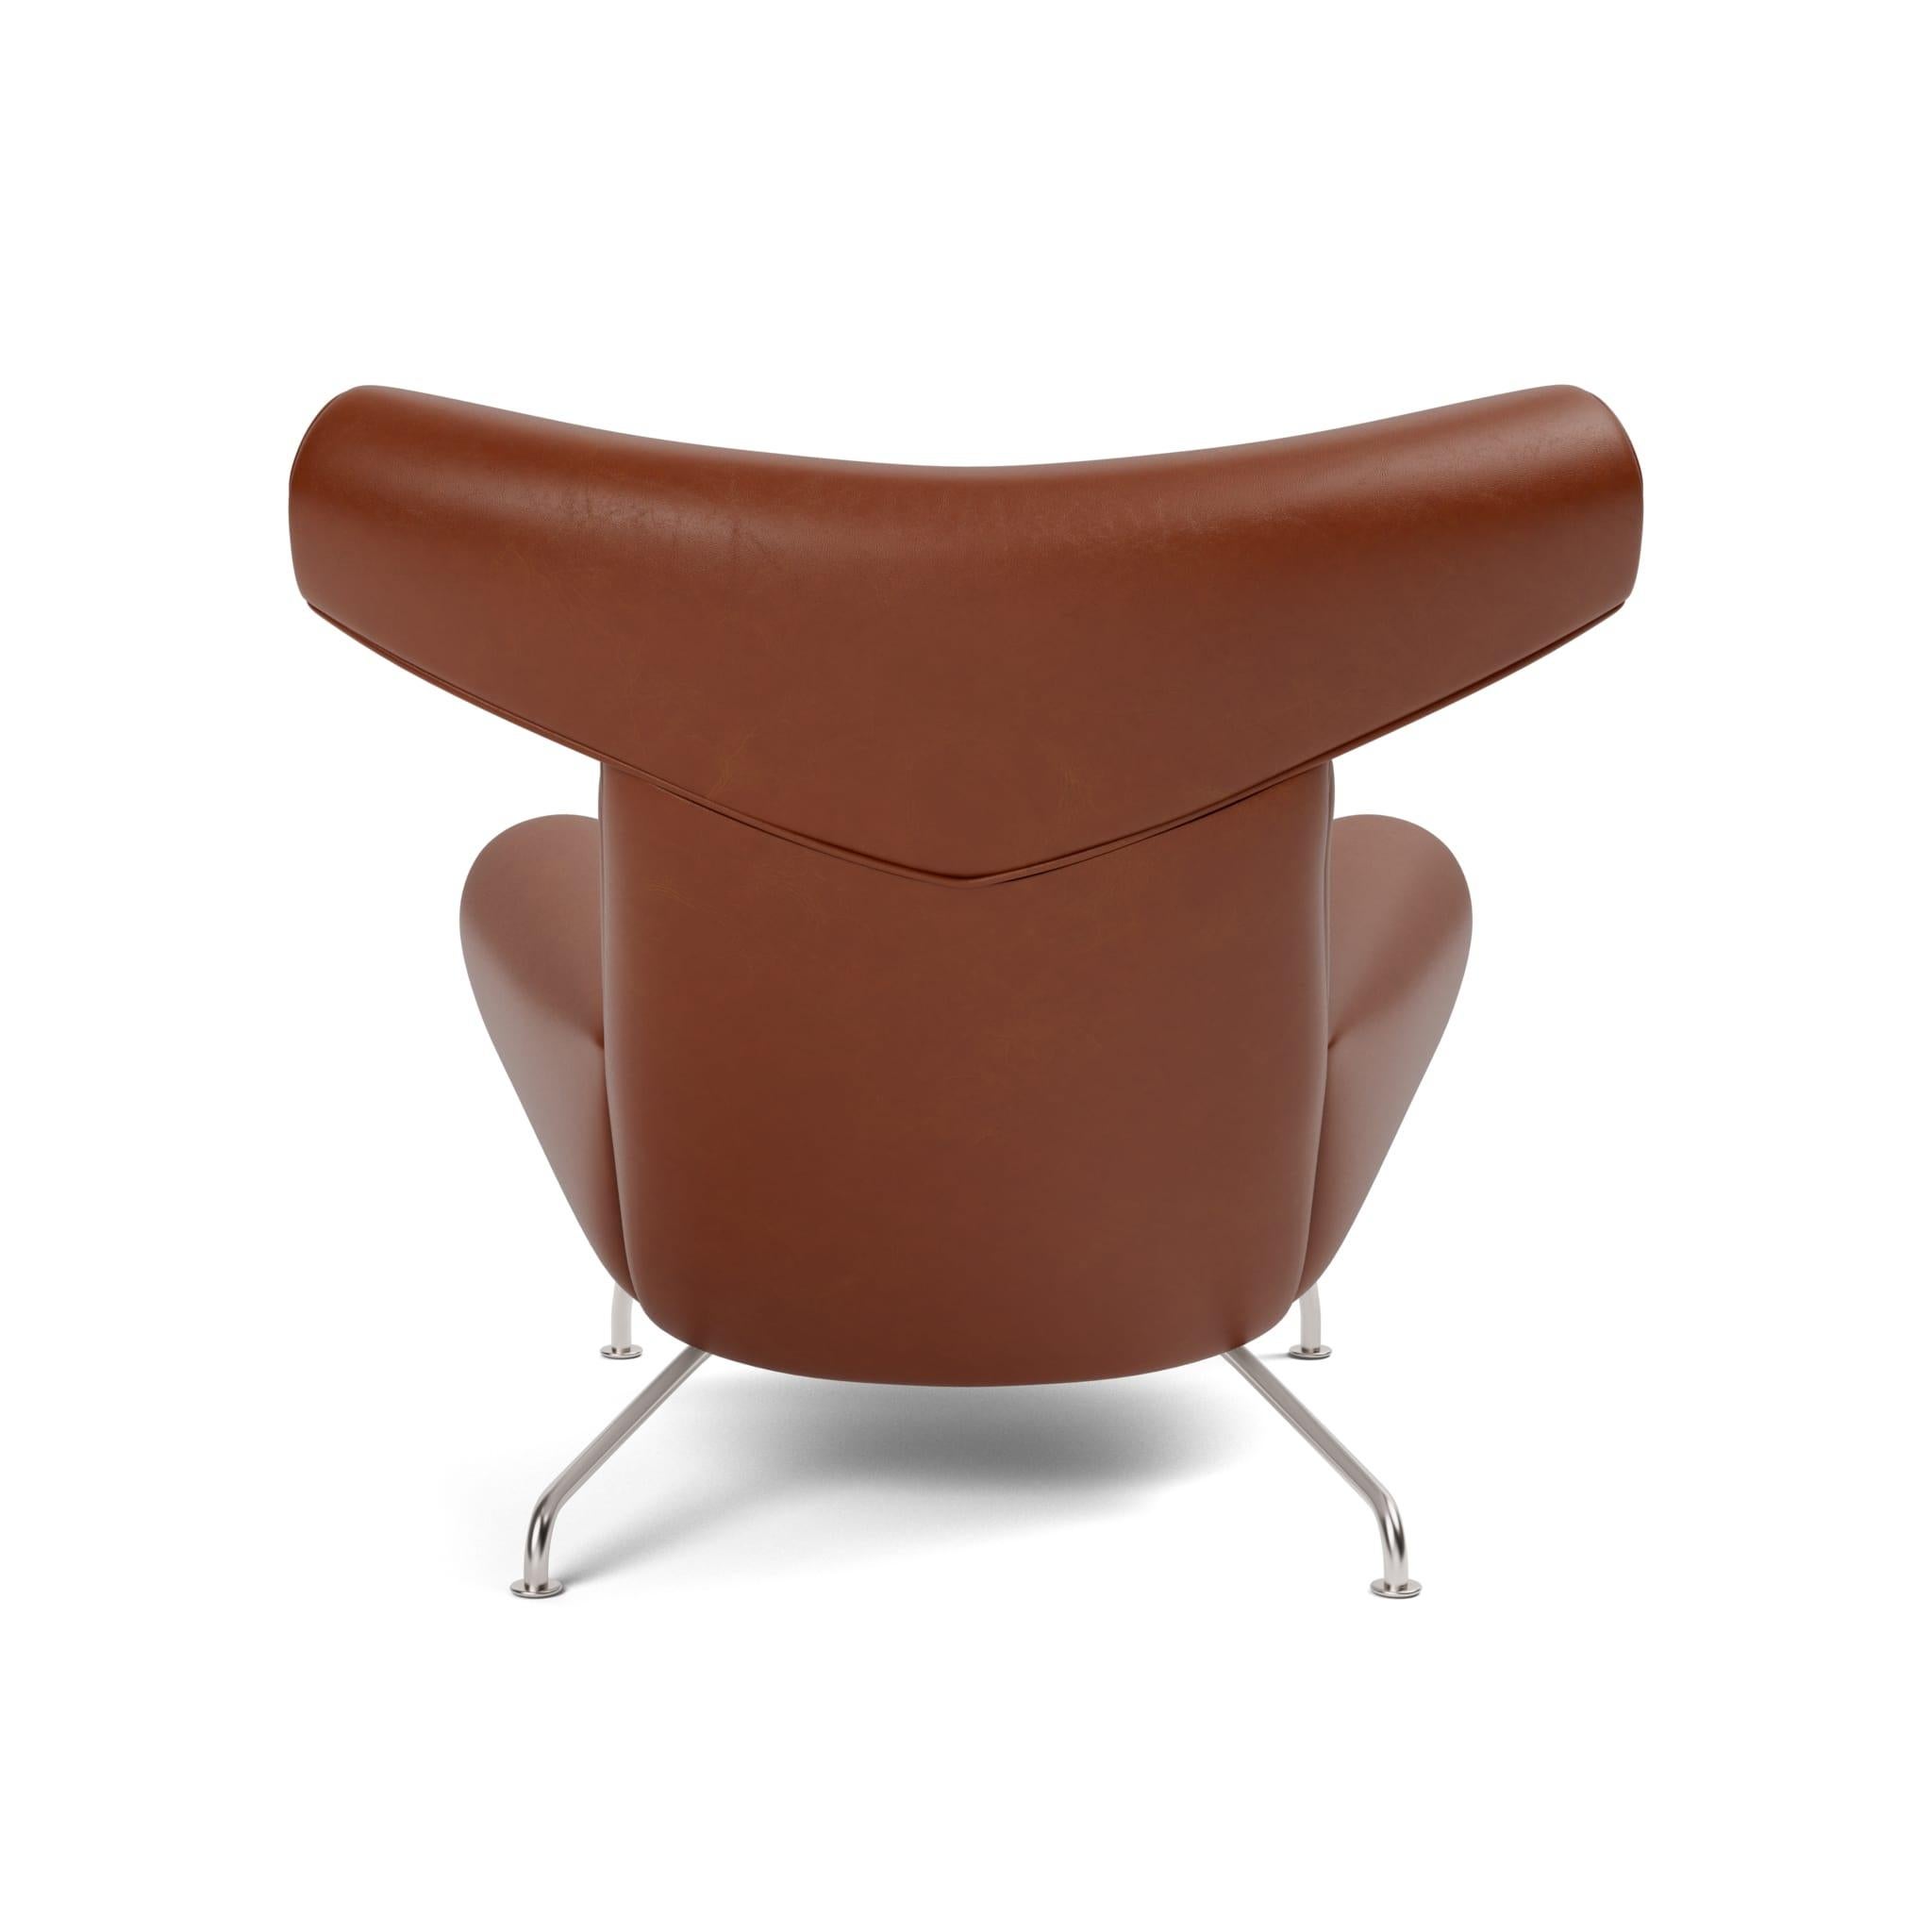 Contemporary Wegner Ox Chair-Russet Brown/Brushed Stainless Steel-by HansJ. Wegner Fredericia For Sale